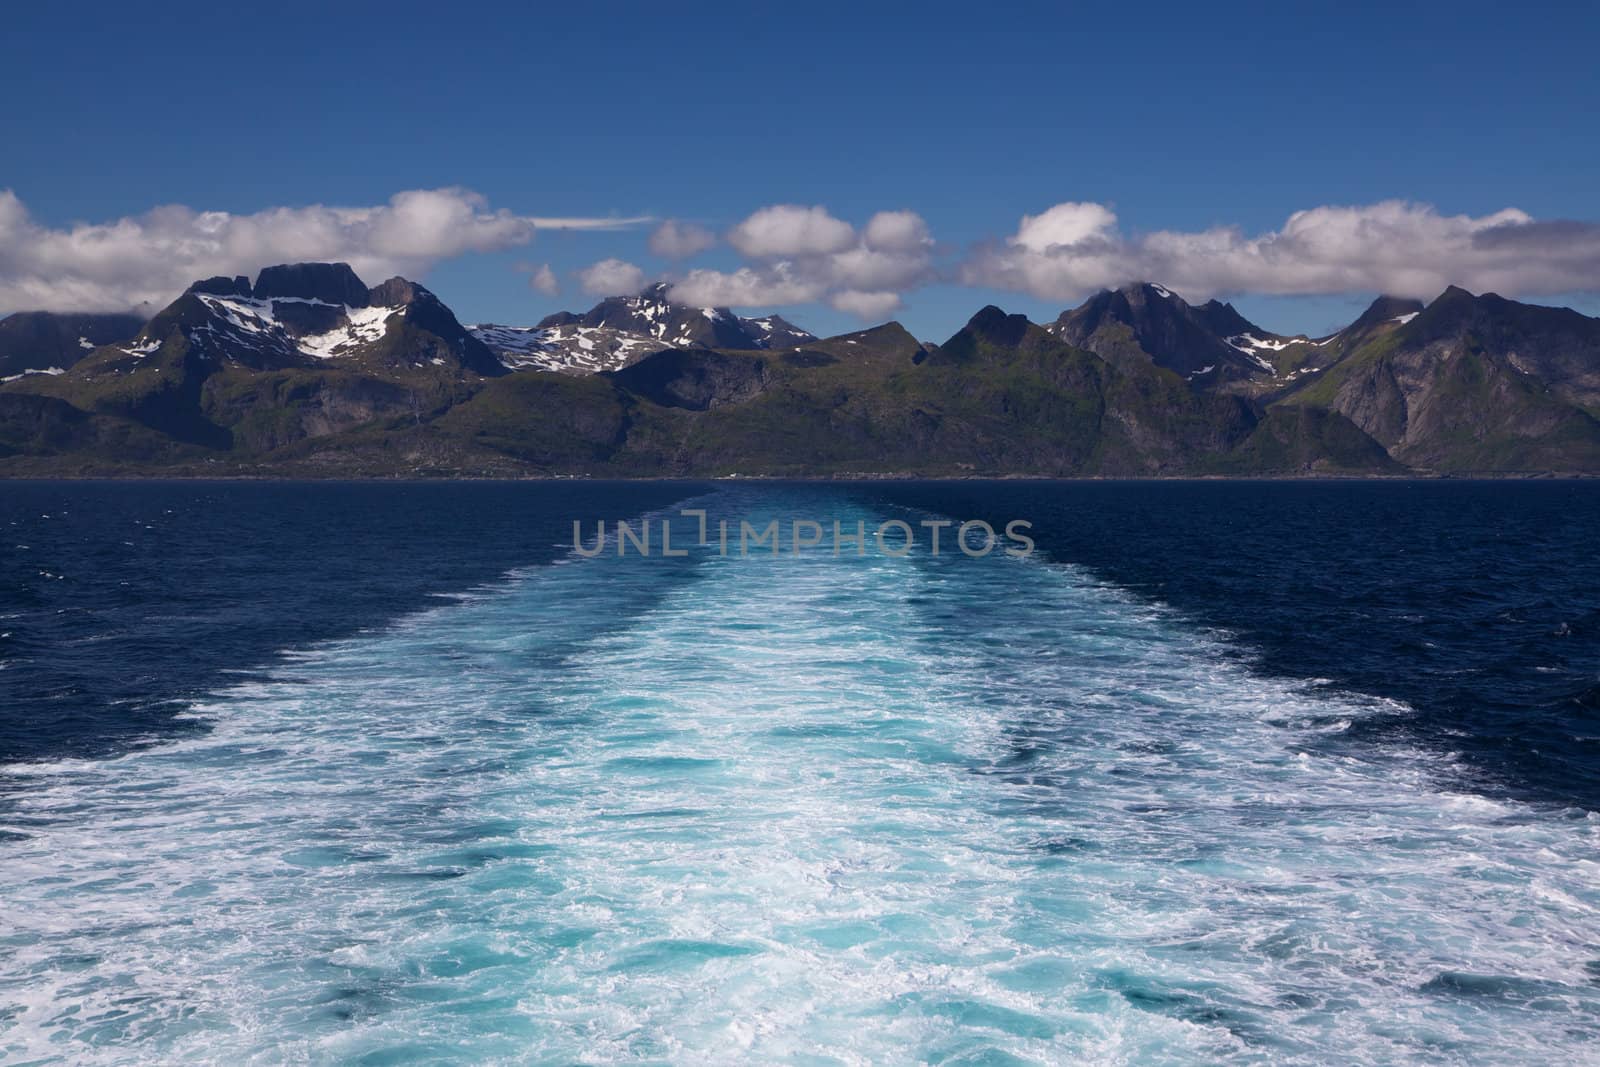 Wall of towering mountain peaks on Lofoten islands in Norway from the local ferry